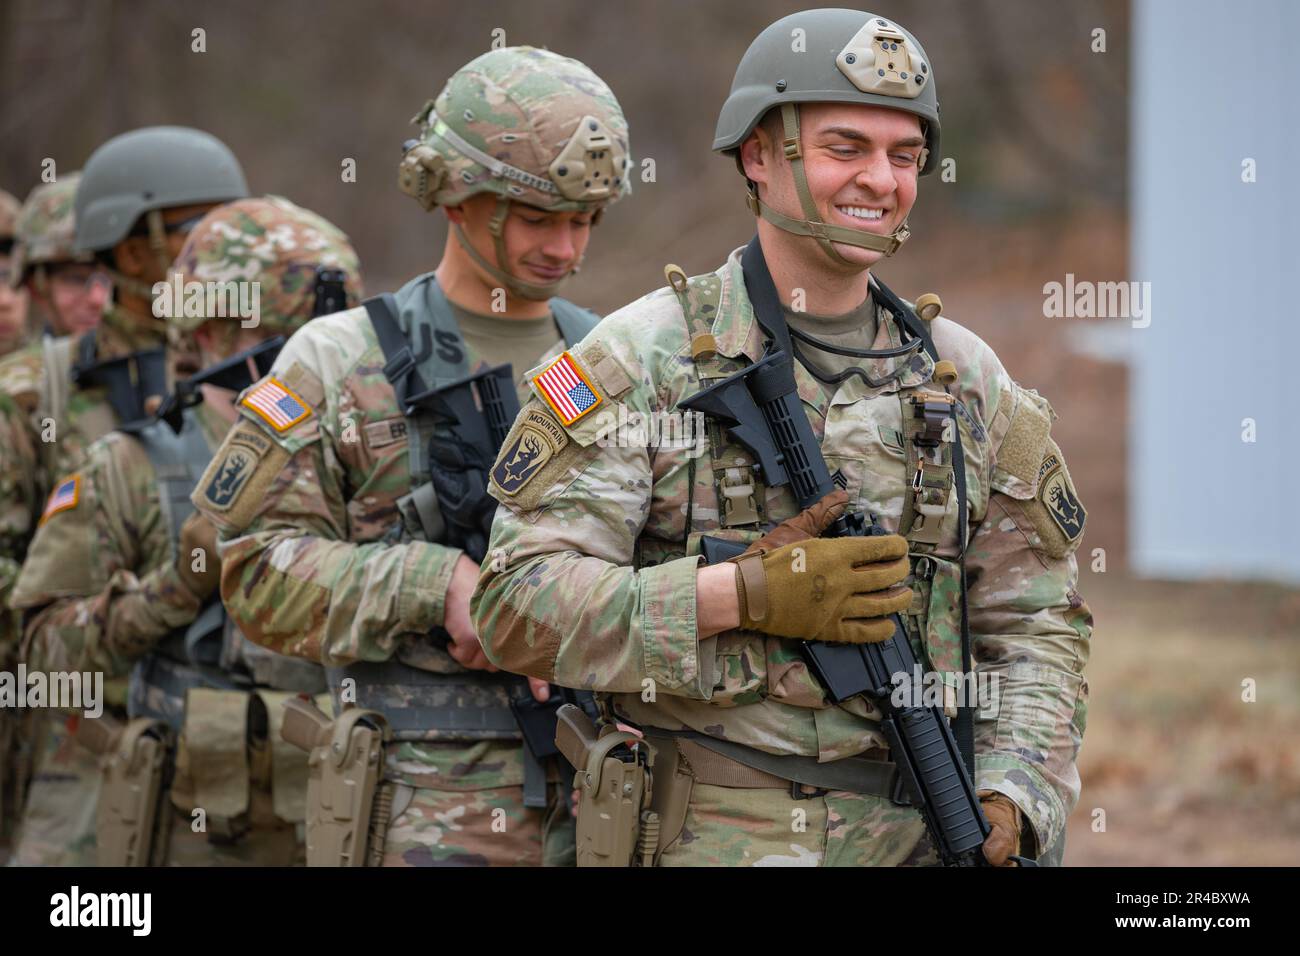 U.S. Army Staff Sgt. Conrad Sheldon, an infantryman assigned to the 1st Battalion, 102nd Infantry Regiment, Connecticut Army National Guard, smiles as he waits in line with his fellow competitors prior to moving out to zero his M4A1 carbine before beginning the stress shoot portion of the 2023 Connecticut Army National Guard Best Warrior Competition at the Connecticut Army National Guard Training Center East Haven Rifle Range, East Haven, Connecticut, March 24, 2023. The competition drew soldiers from across the Connecticut Army National Guard and over the course of three days these competitor Stock Photo